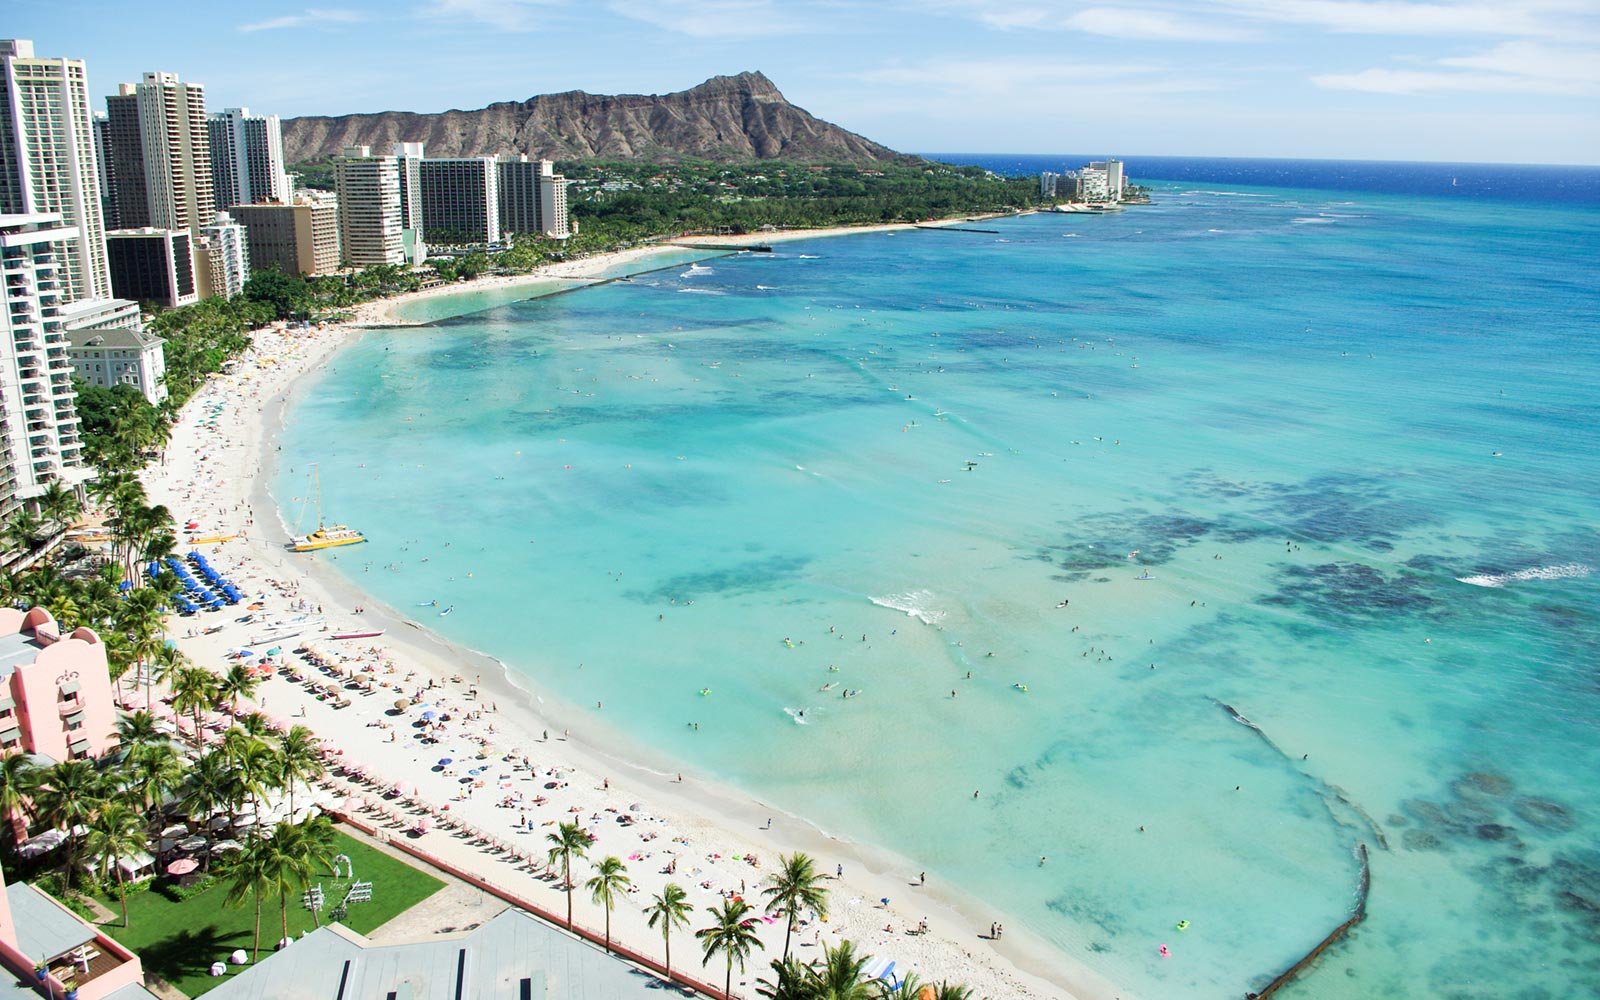 Don’t Call Yourself a Trivia Expert If You Can’t Get 15/20 on This General Knowledge Quiz Waikiki Beach and Diamond Head in Honolulu, Oahu Island, Hawaii